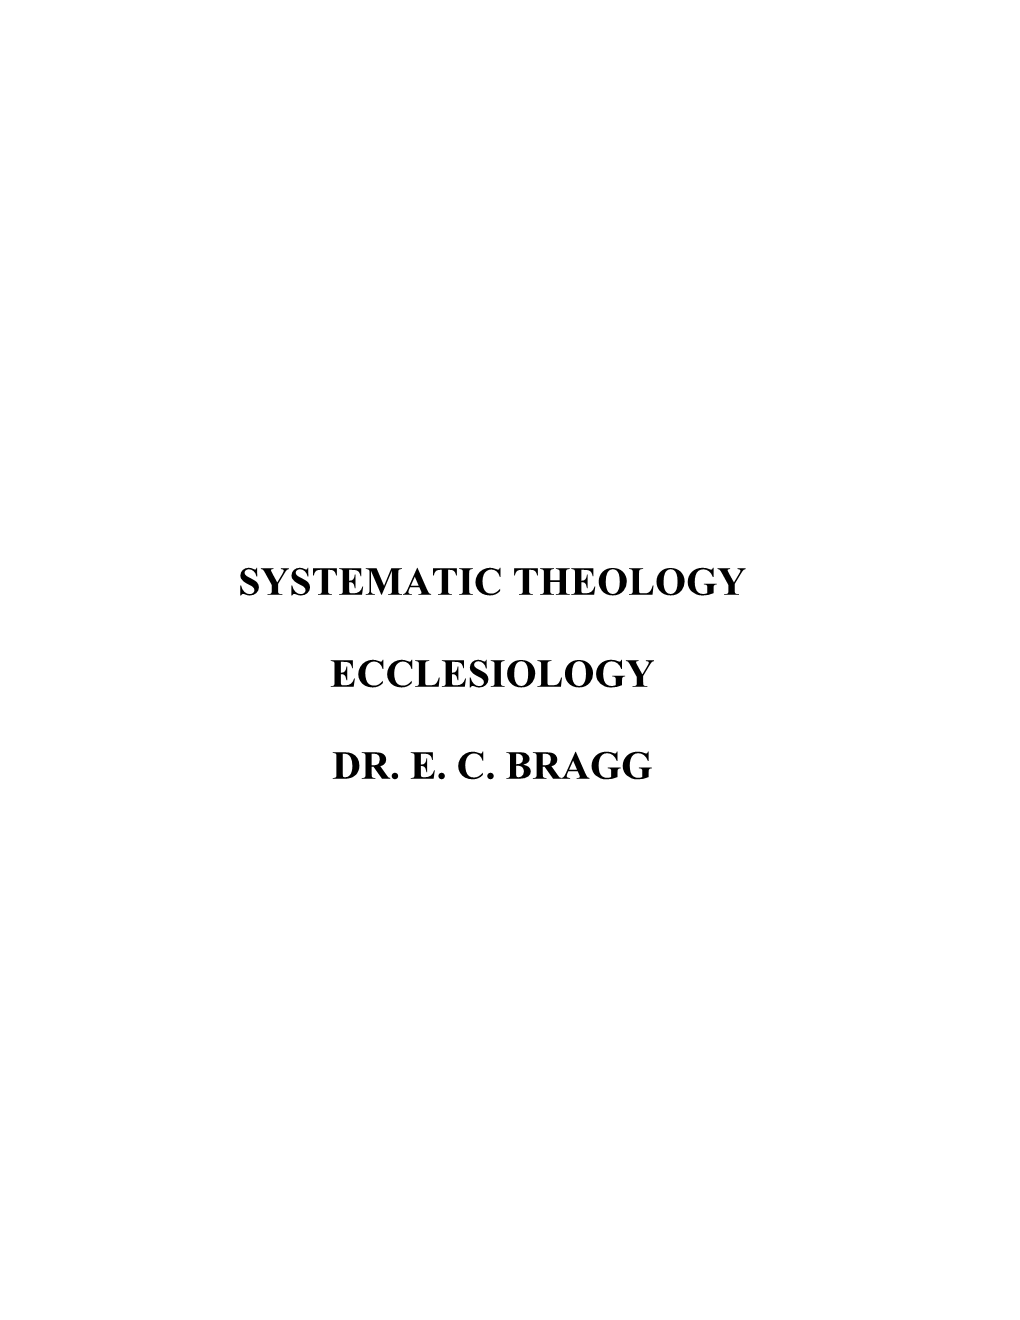 Systematic Theology Ecclesiology Dr. E. C. Bragg